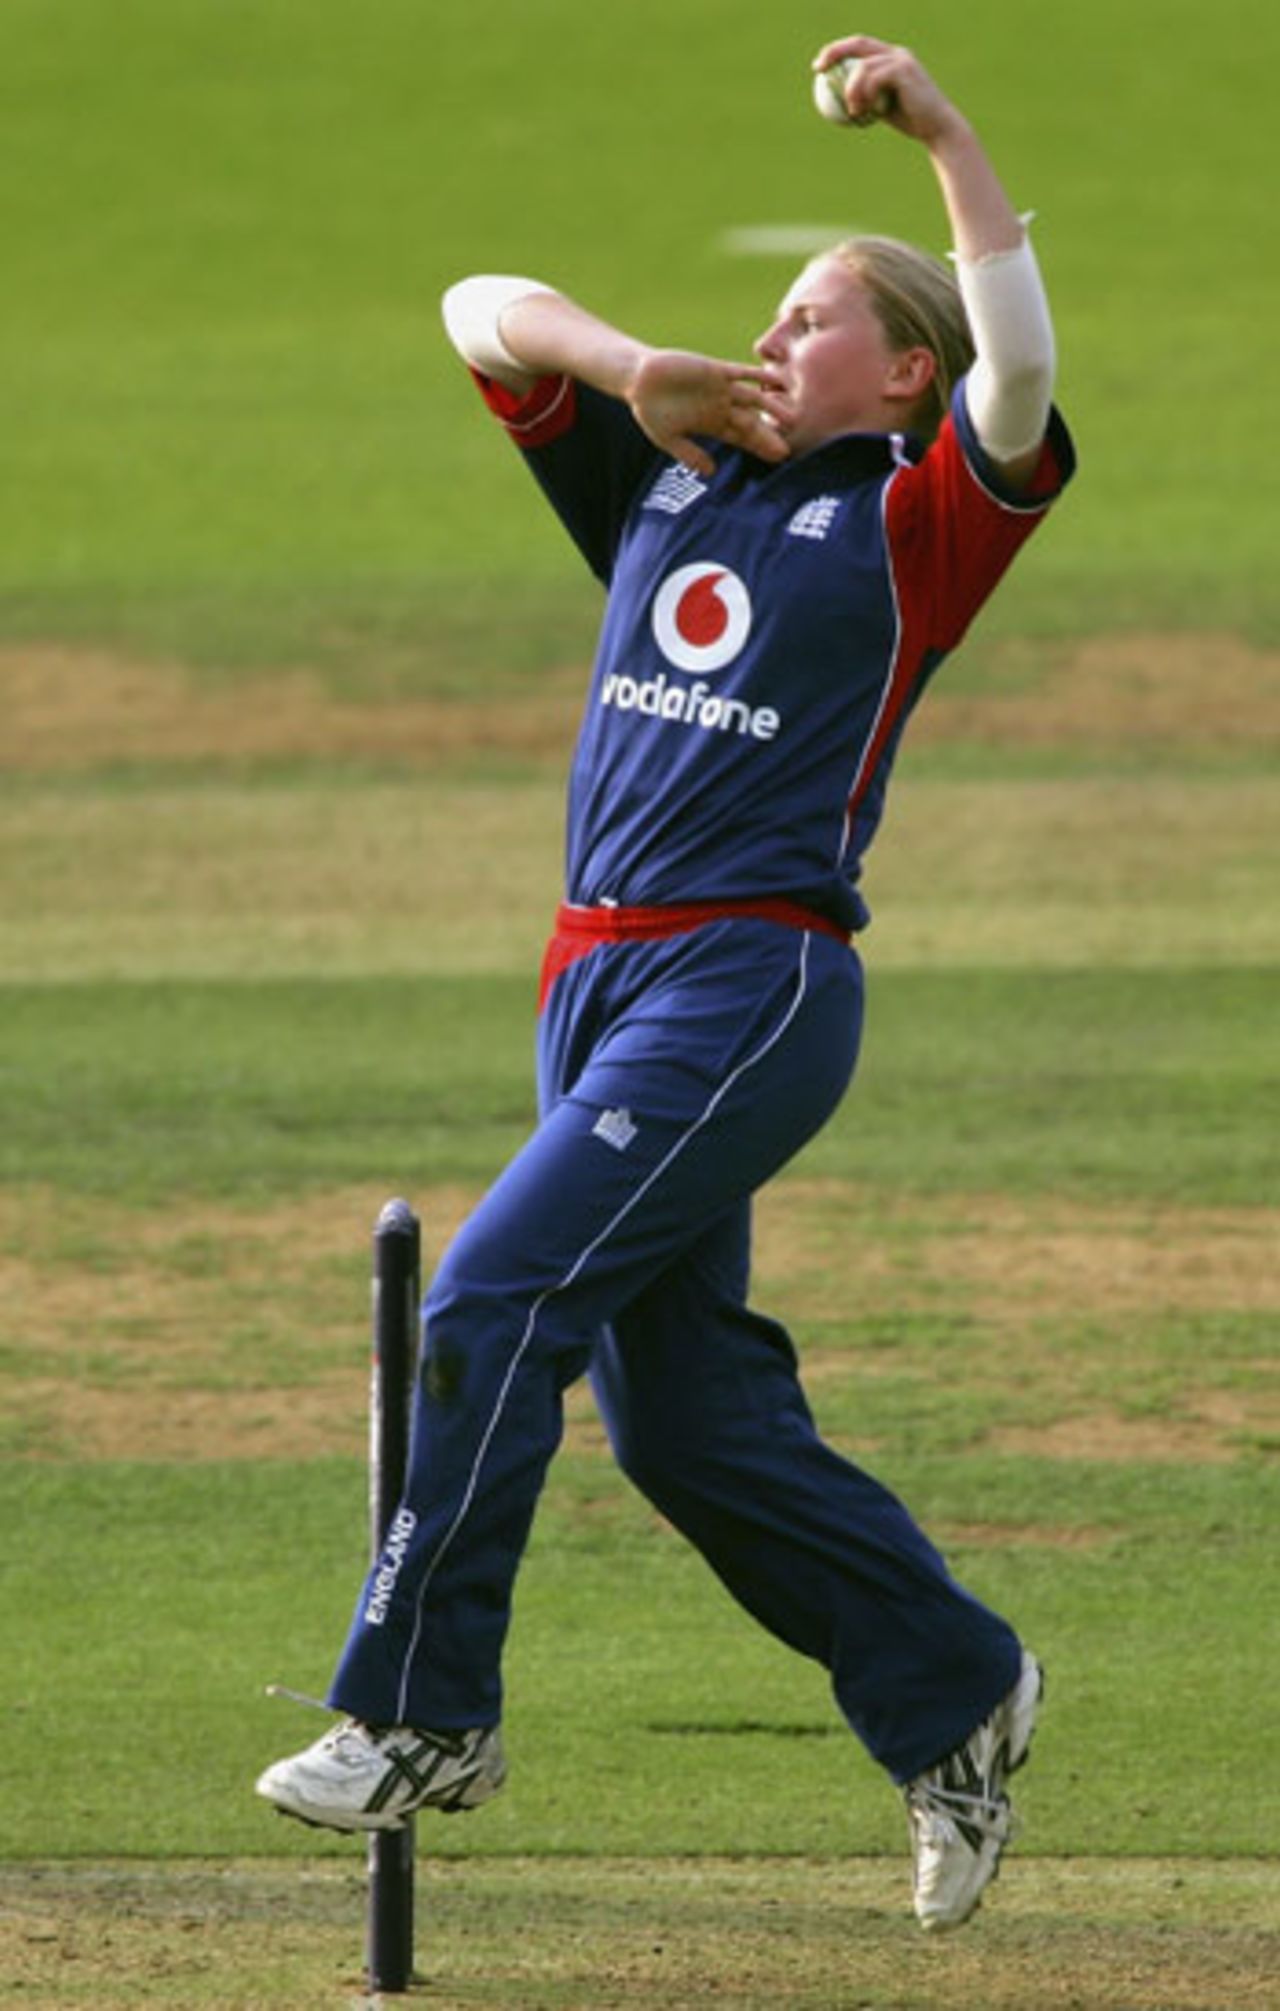 Holly Colvin runs into bowl, England Women v India Women, 1st ODI, Lord's, August 14, 2006